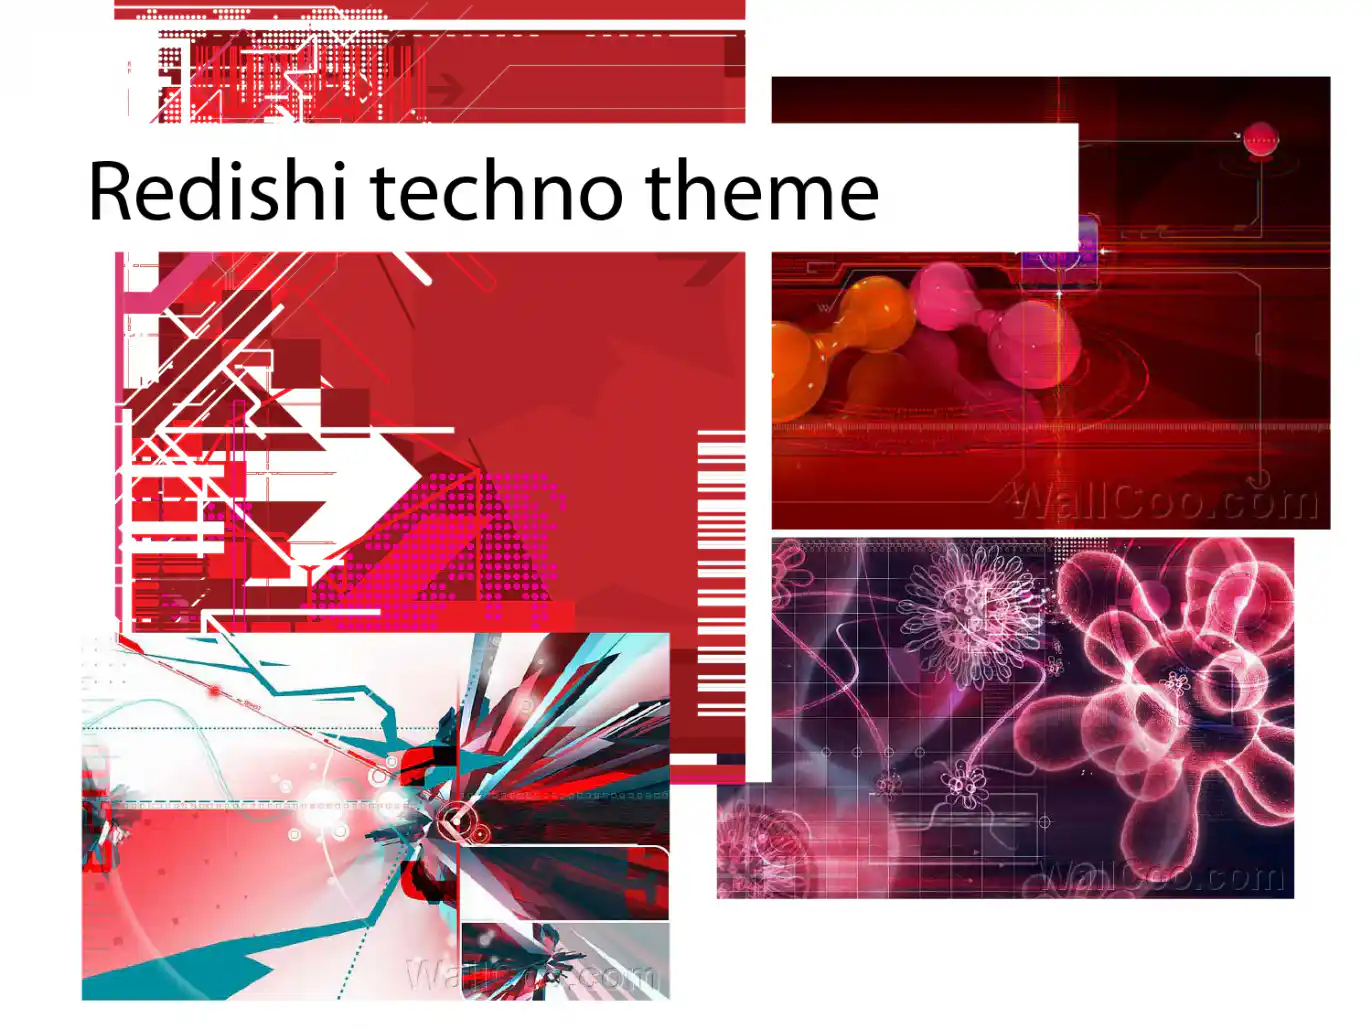 image showing red techno look